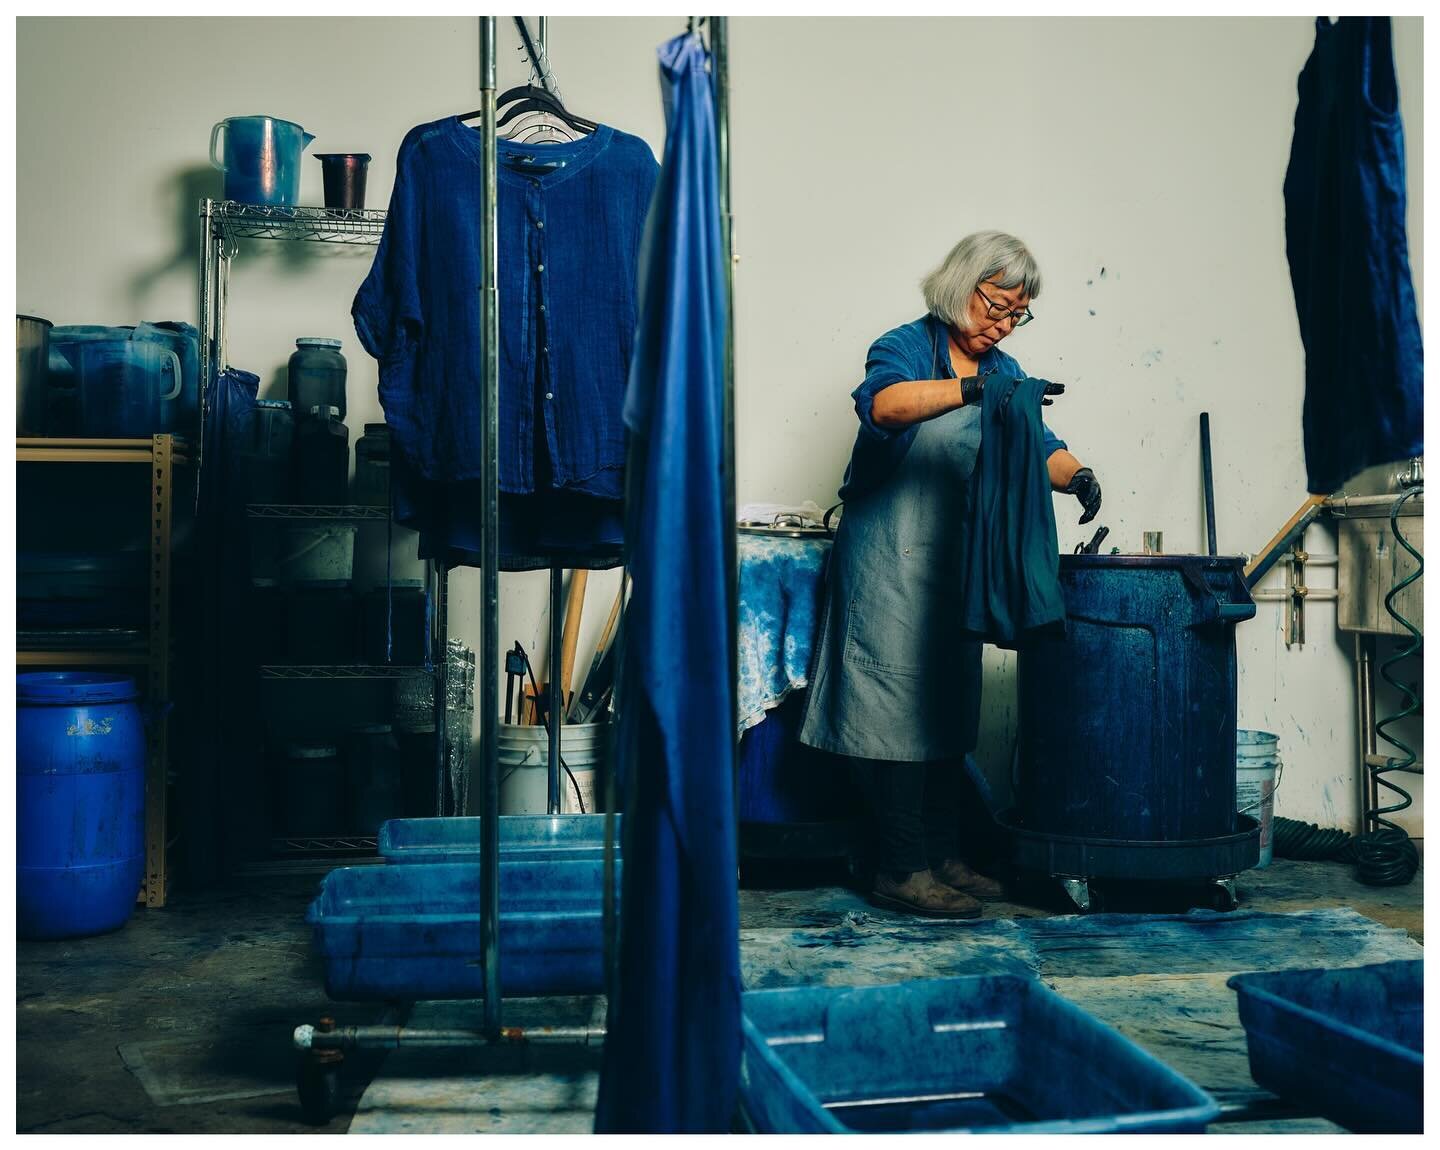 Kathy Hattori, founder of @botanicalcolors, mid-process of an indigo collection for @eileenfisherrenew. 

Kathy has become an authority in the natural dye world, pushing the textile industry towards safe alternatives to petrochemical based synthetic 